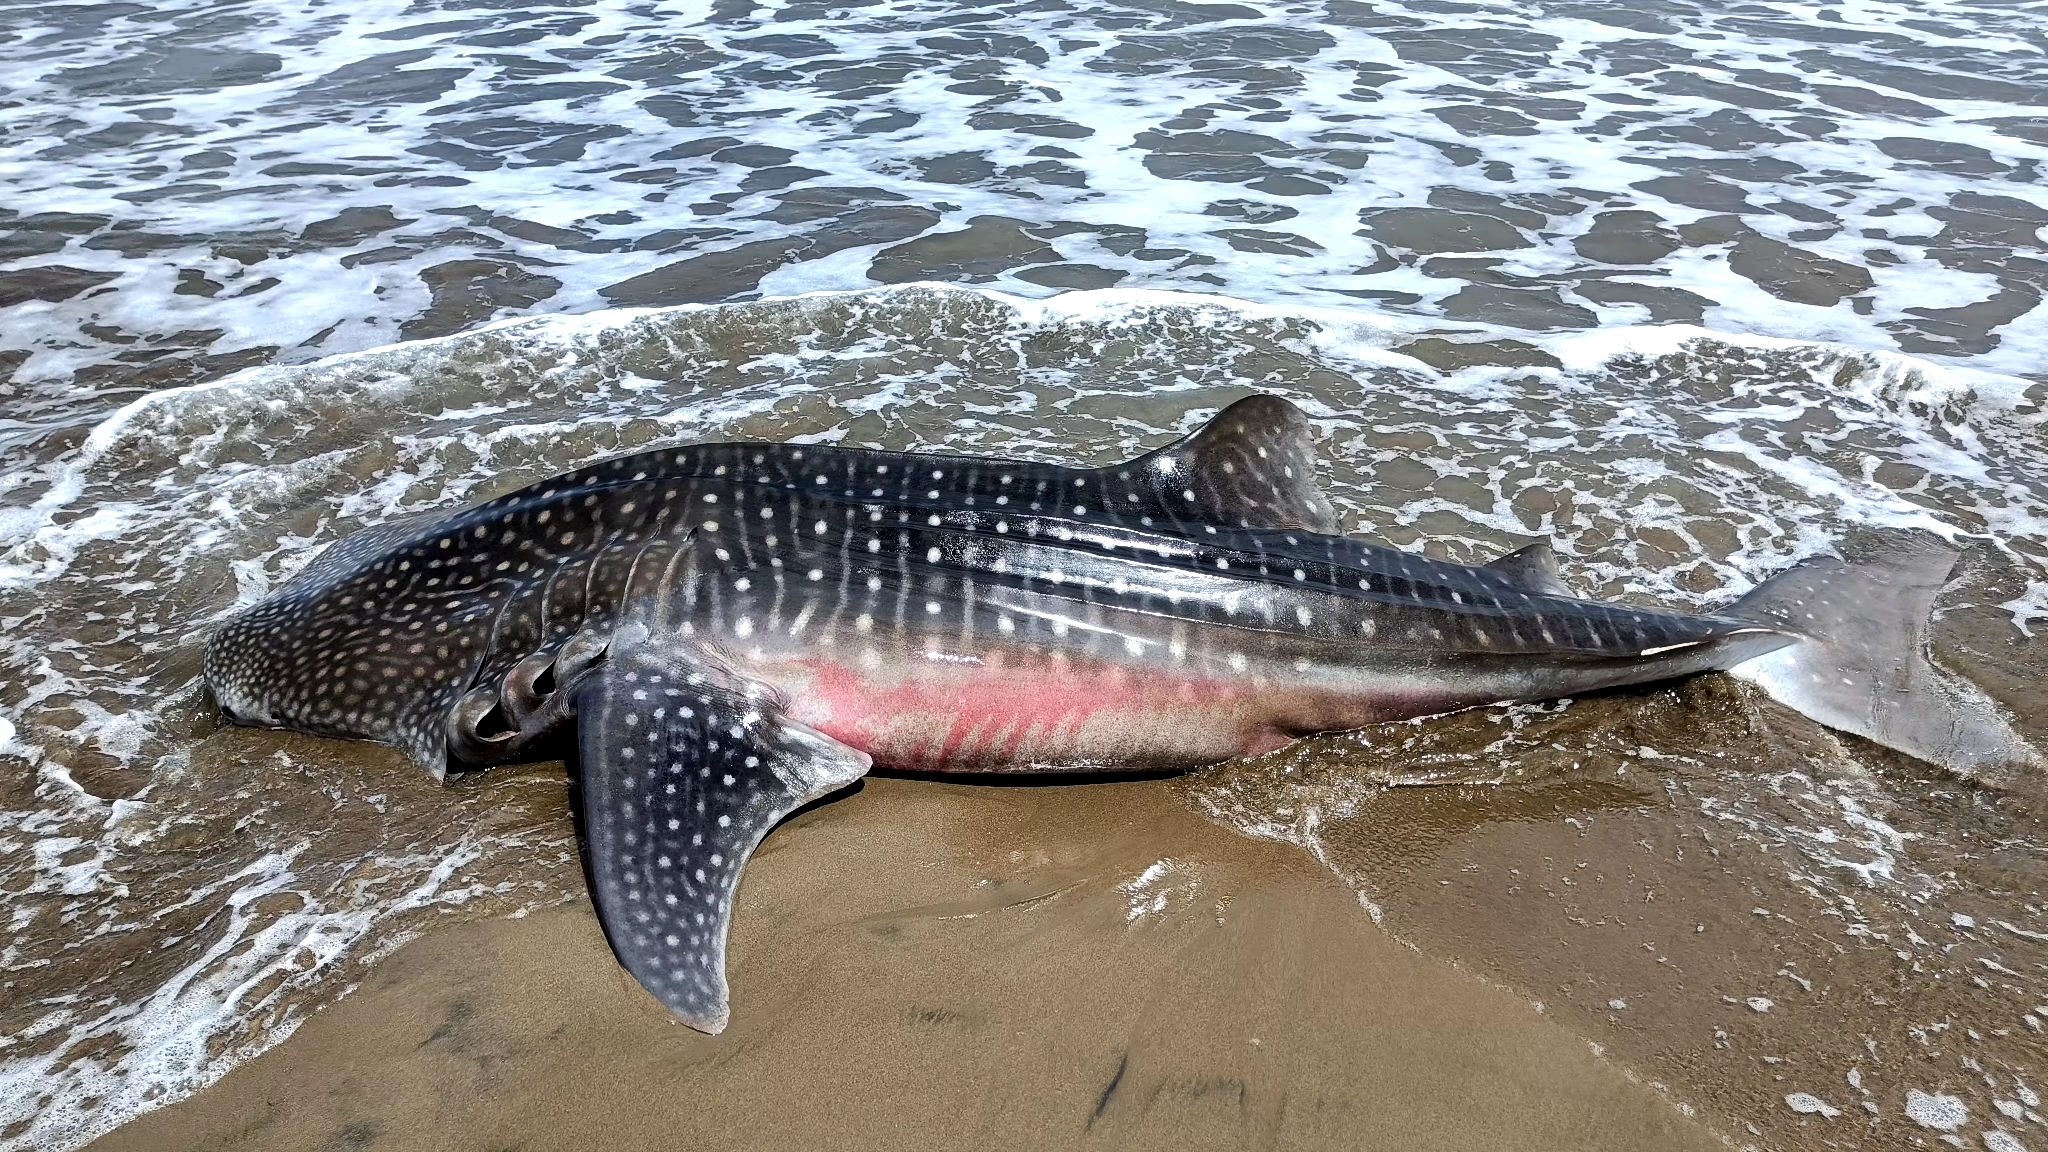 A dead whale shark was found on the shores of Barangay Bagasbas in Mondragon town, Northern Samar